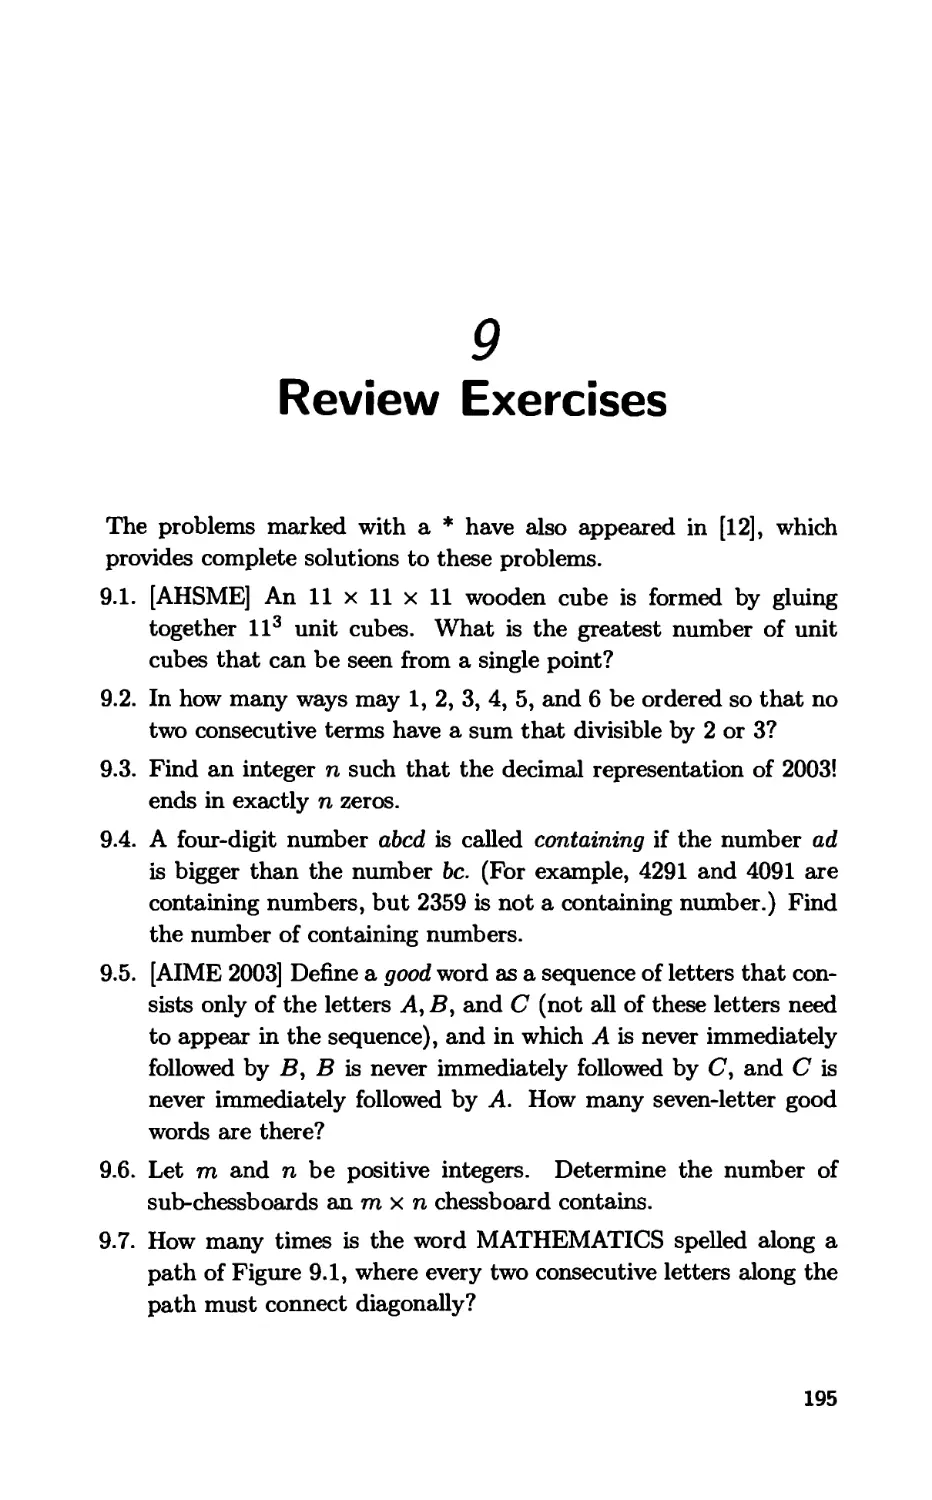 9. Review Exercises